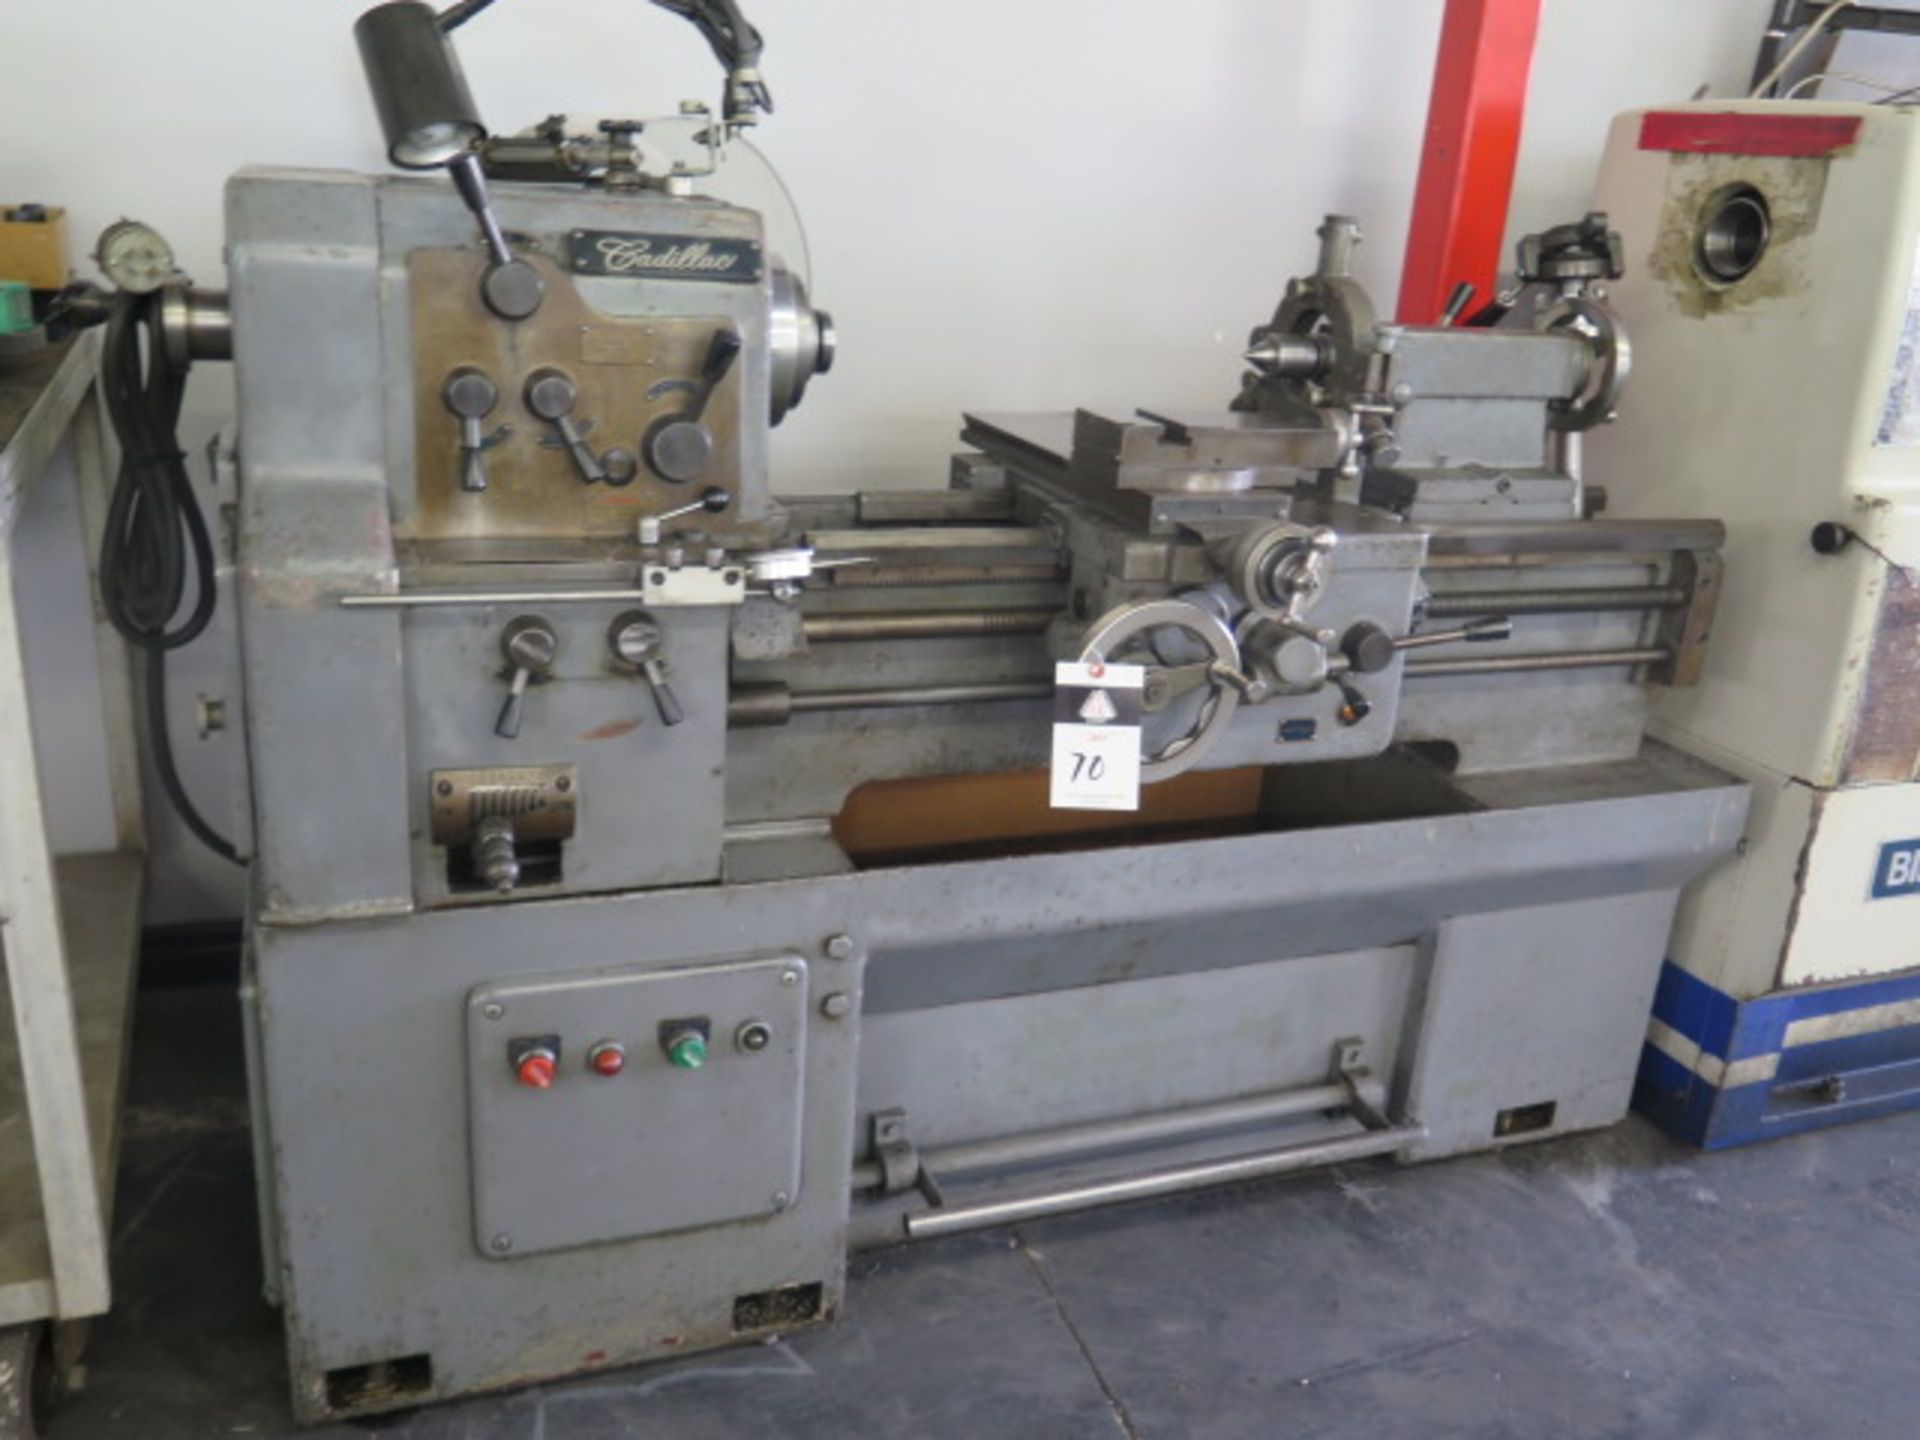 Cadillac 14" x 28" Geared Lathe w/ 83-1800 RPM, Inch Threading, Tailstock, Steady Rest, SOLD AS IS - Image 2 of 10